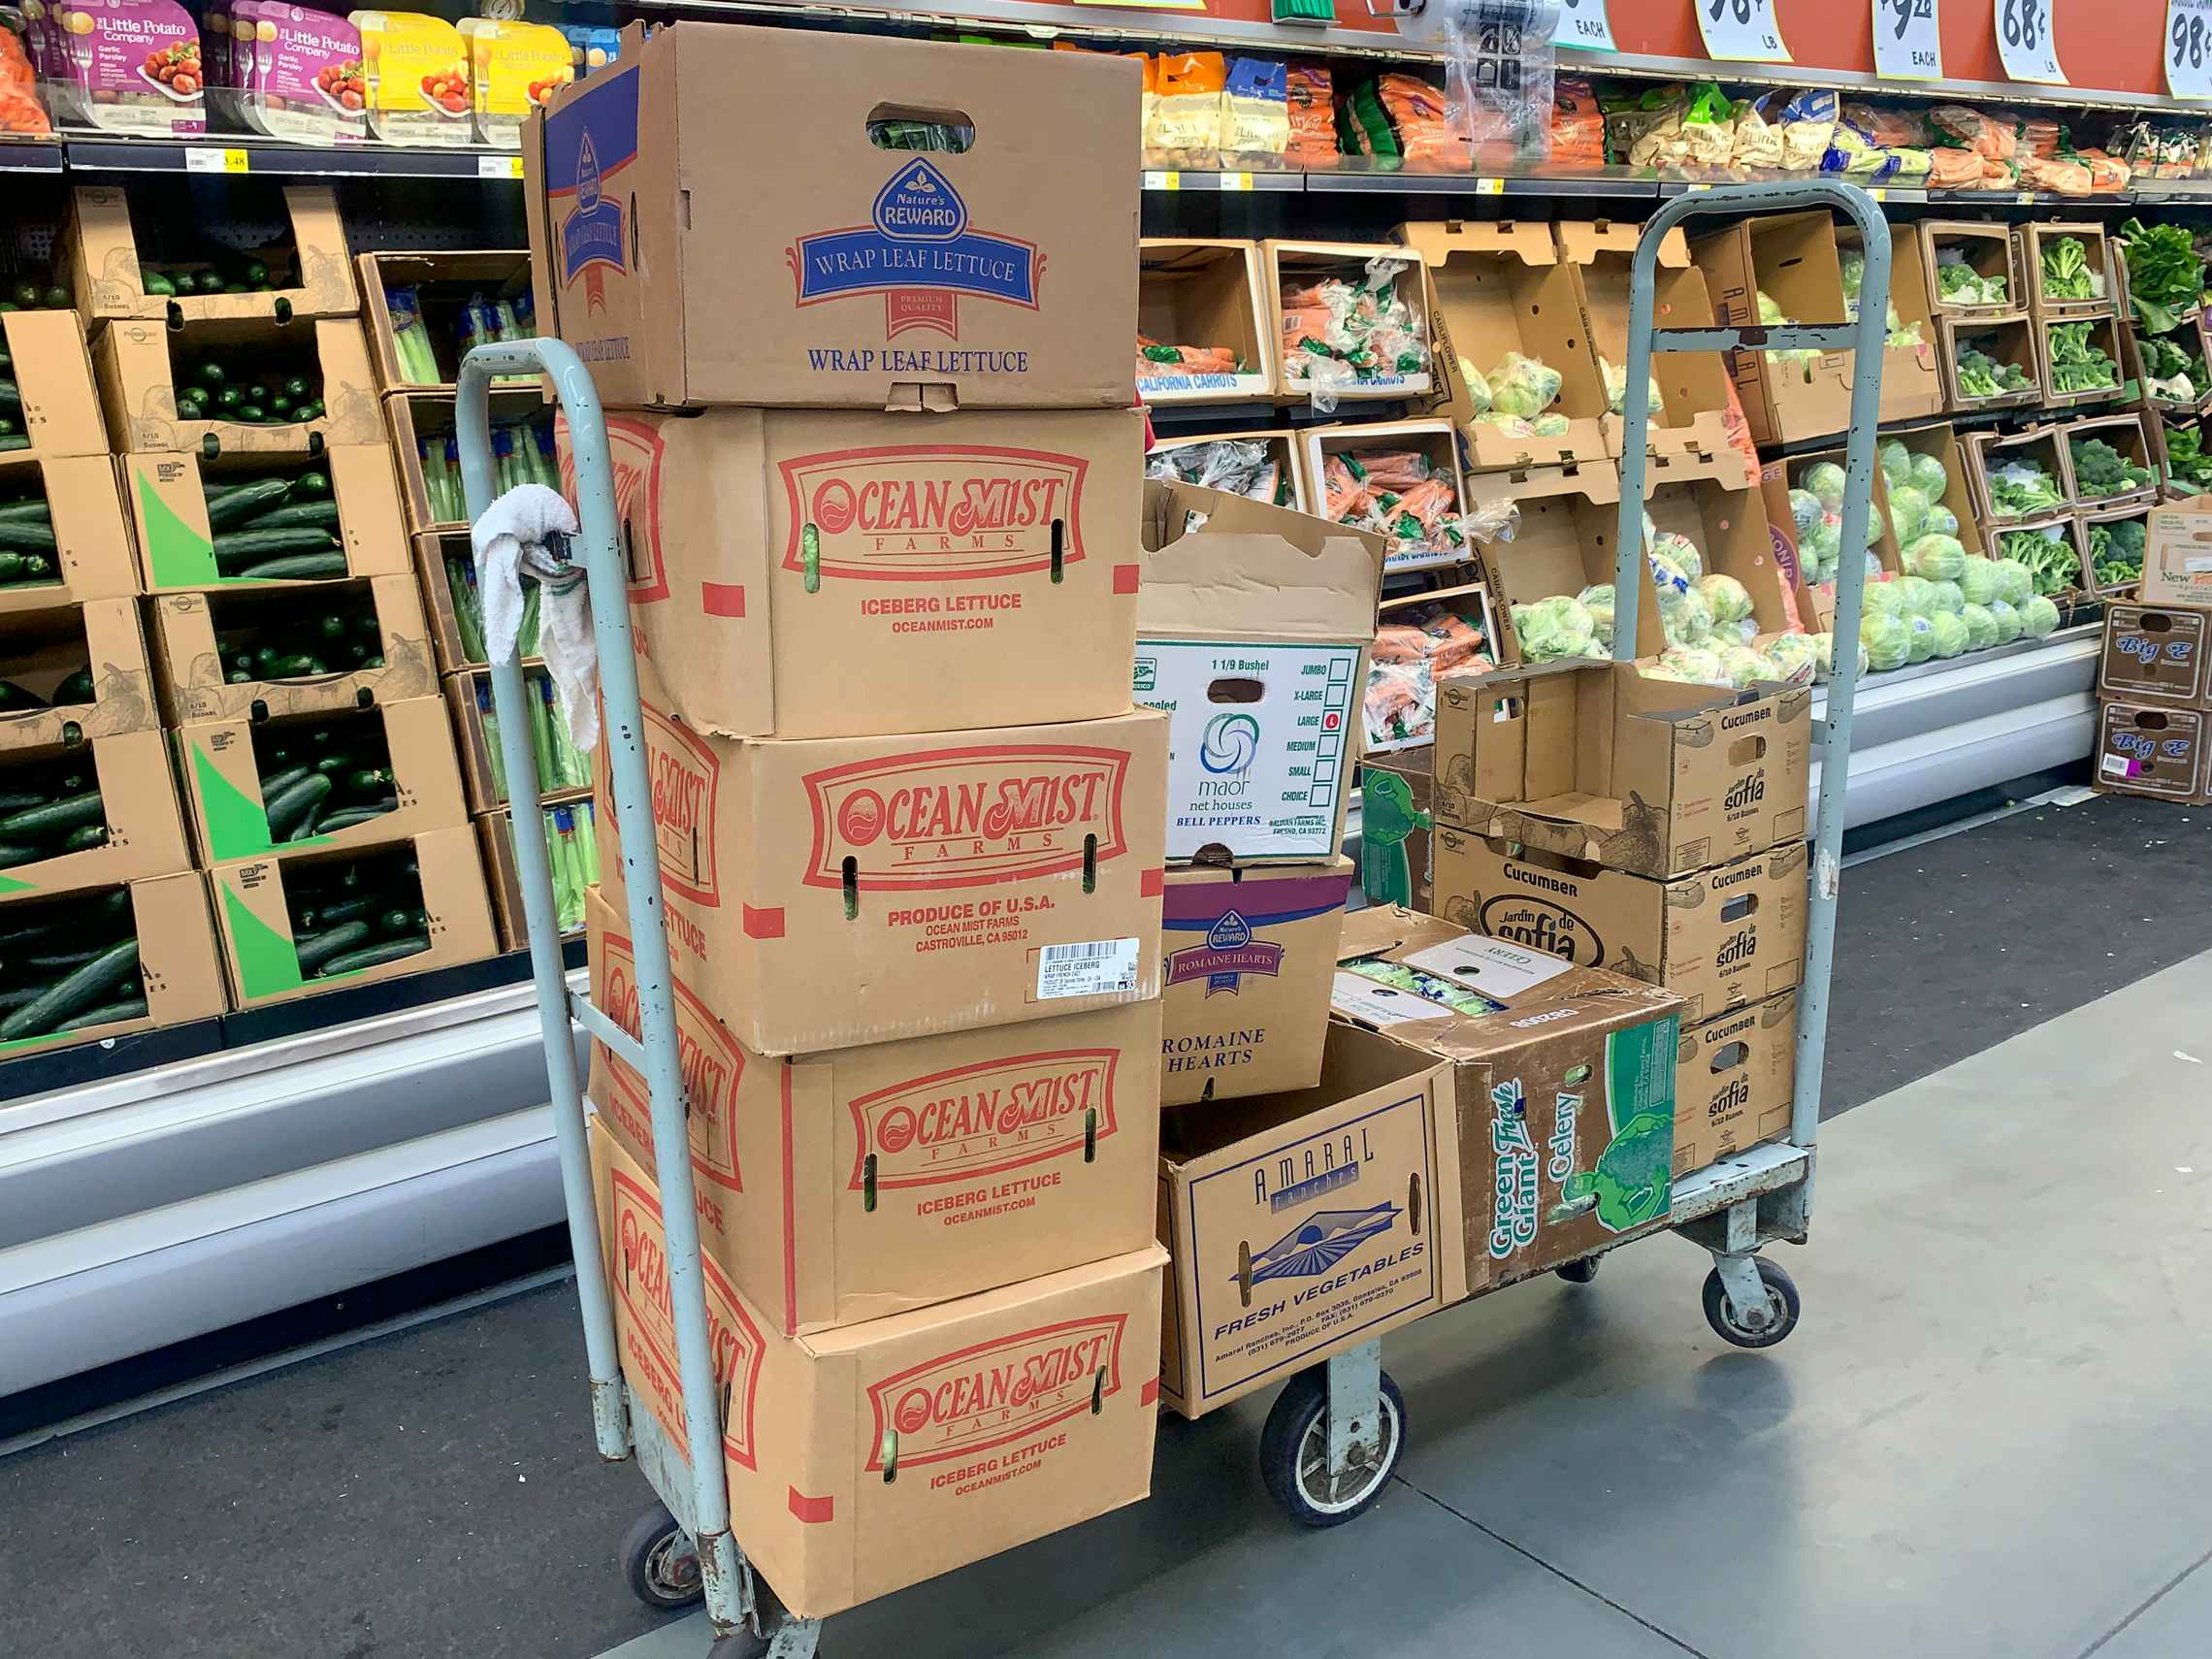 Cardboard produce boxes on a cart inside Winco.